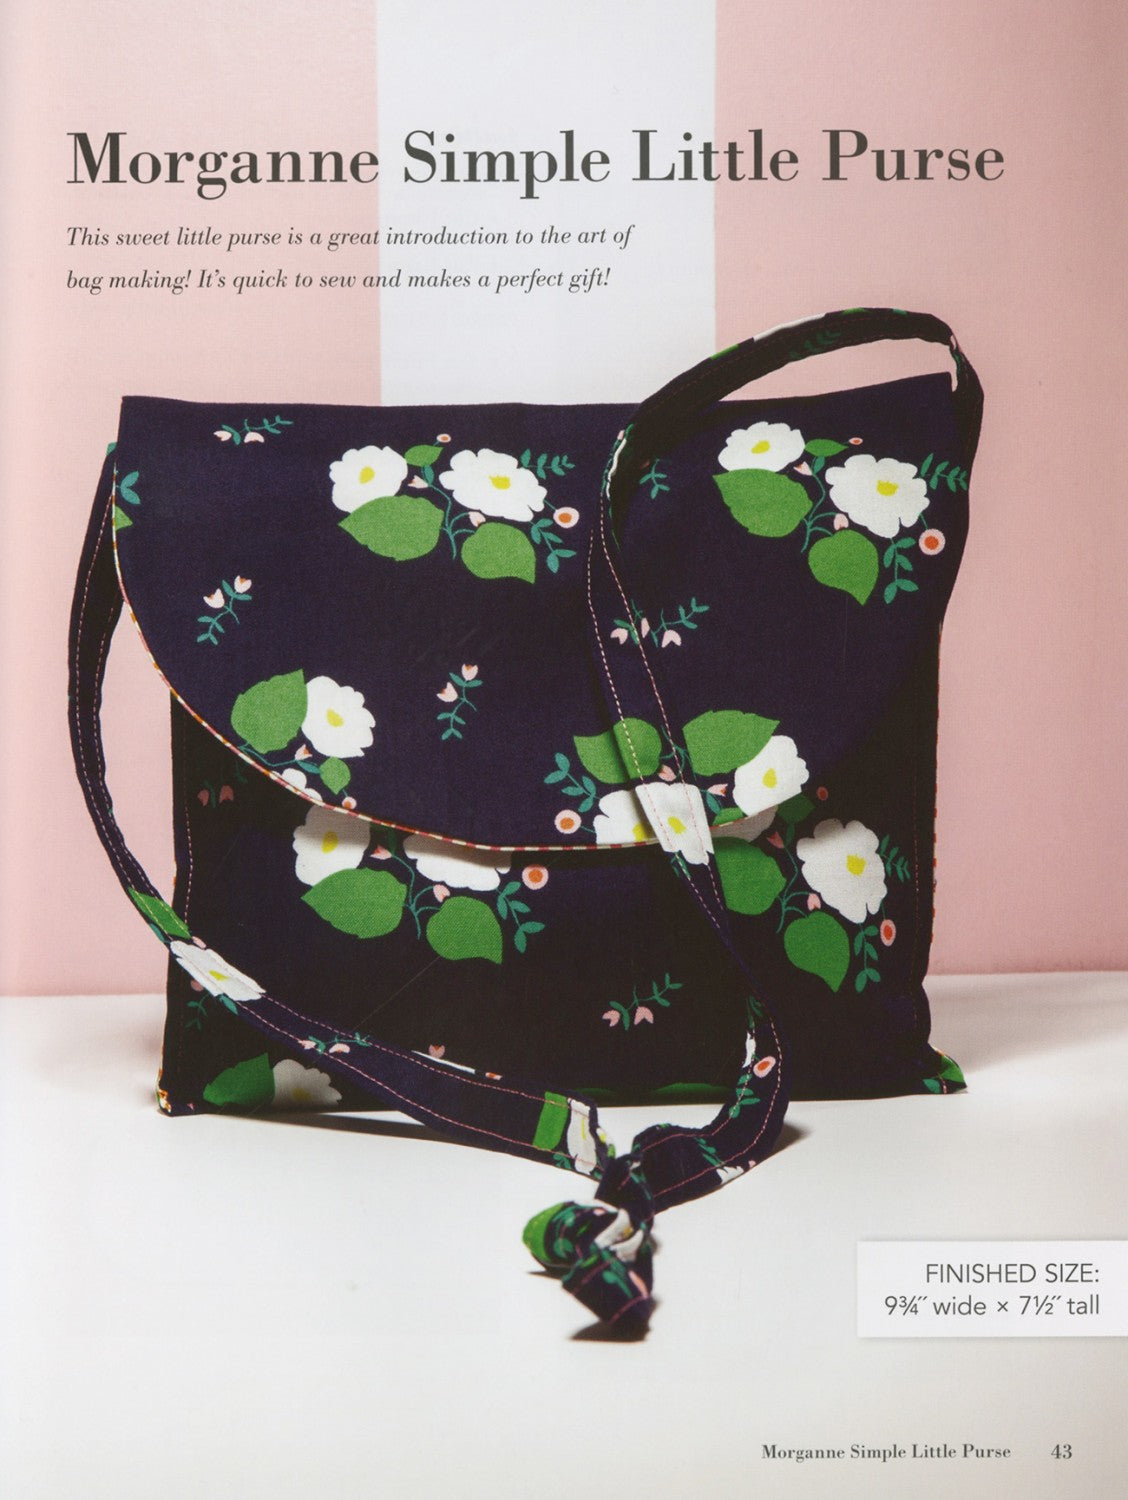 Sew Bags Sewing Guide Book by Hilarie Wakefield Dayton for Stash Books